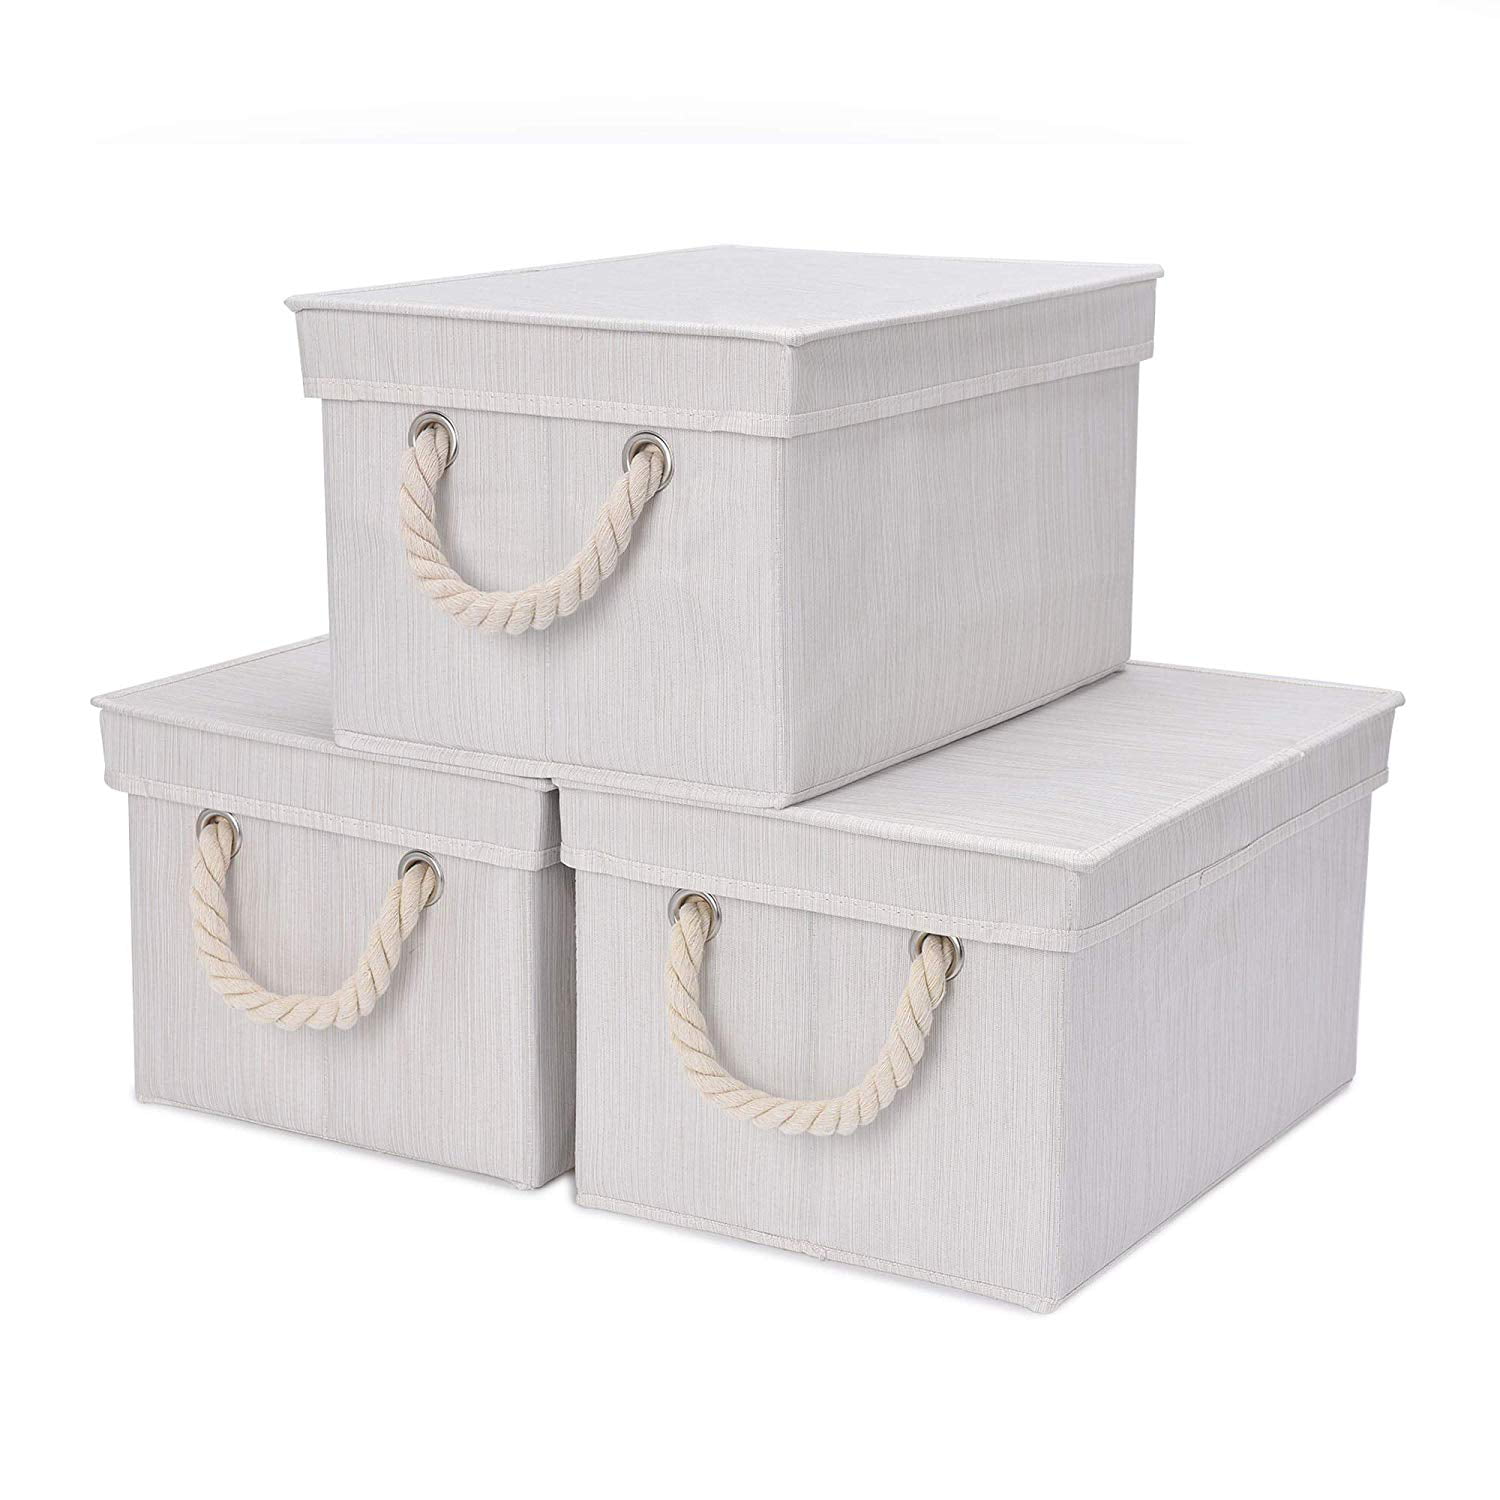 StorageWorks Storage Bins with Lid and Cotton Rope Handles, Foldable ...